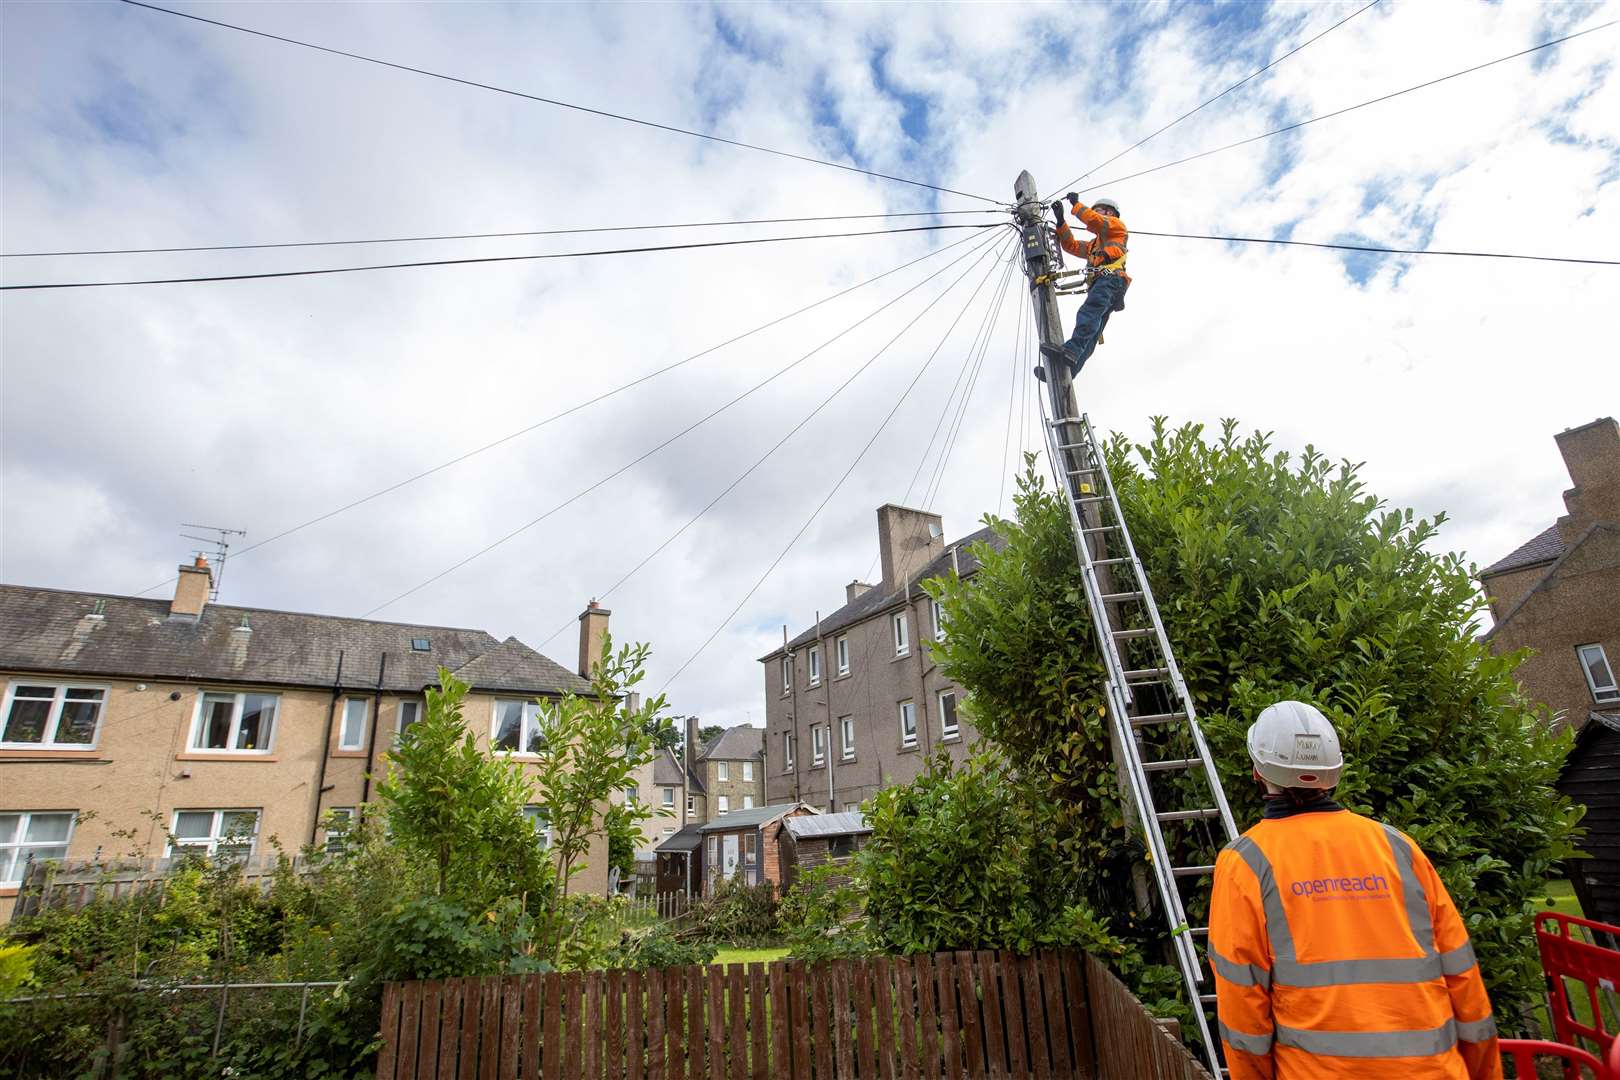 Some 400,000 homes and businesses throughout Scotland are set to benefit from ultrafast broadband in the latest roll-out ammounced by OpenReach.